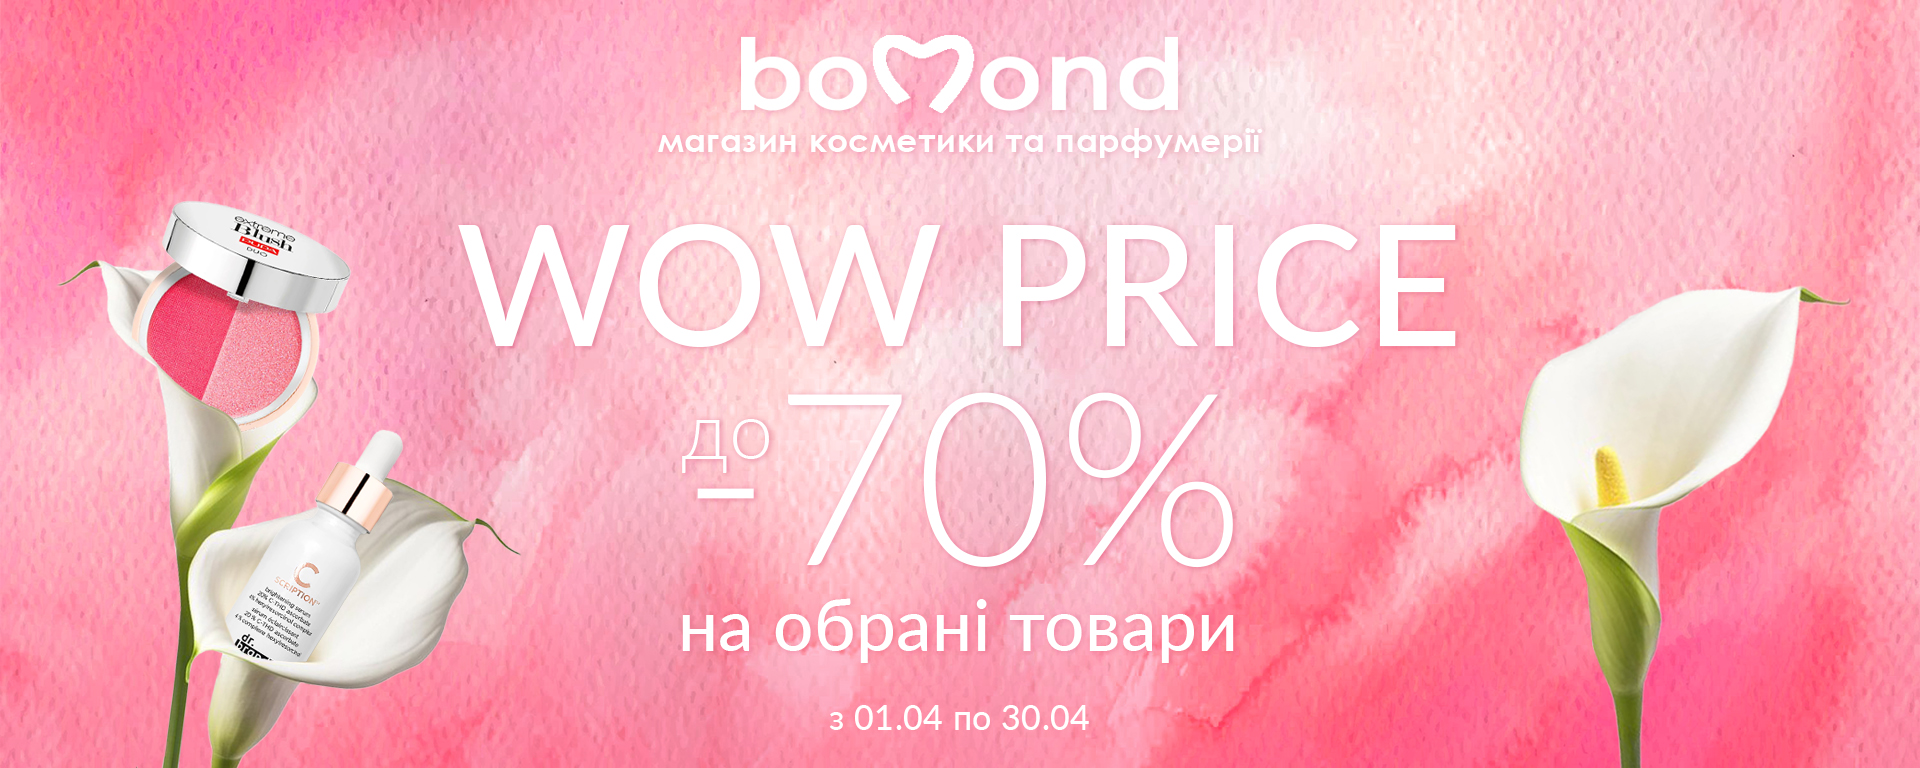 WOW Price in Bomond discounts up to -70%